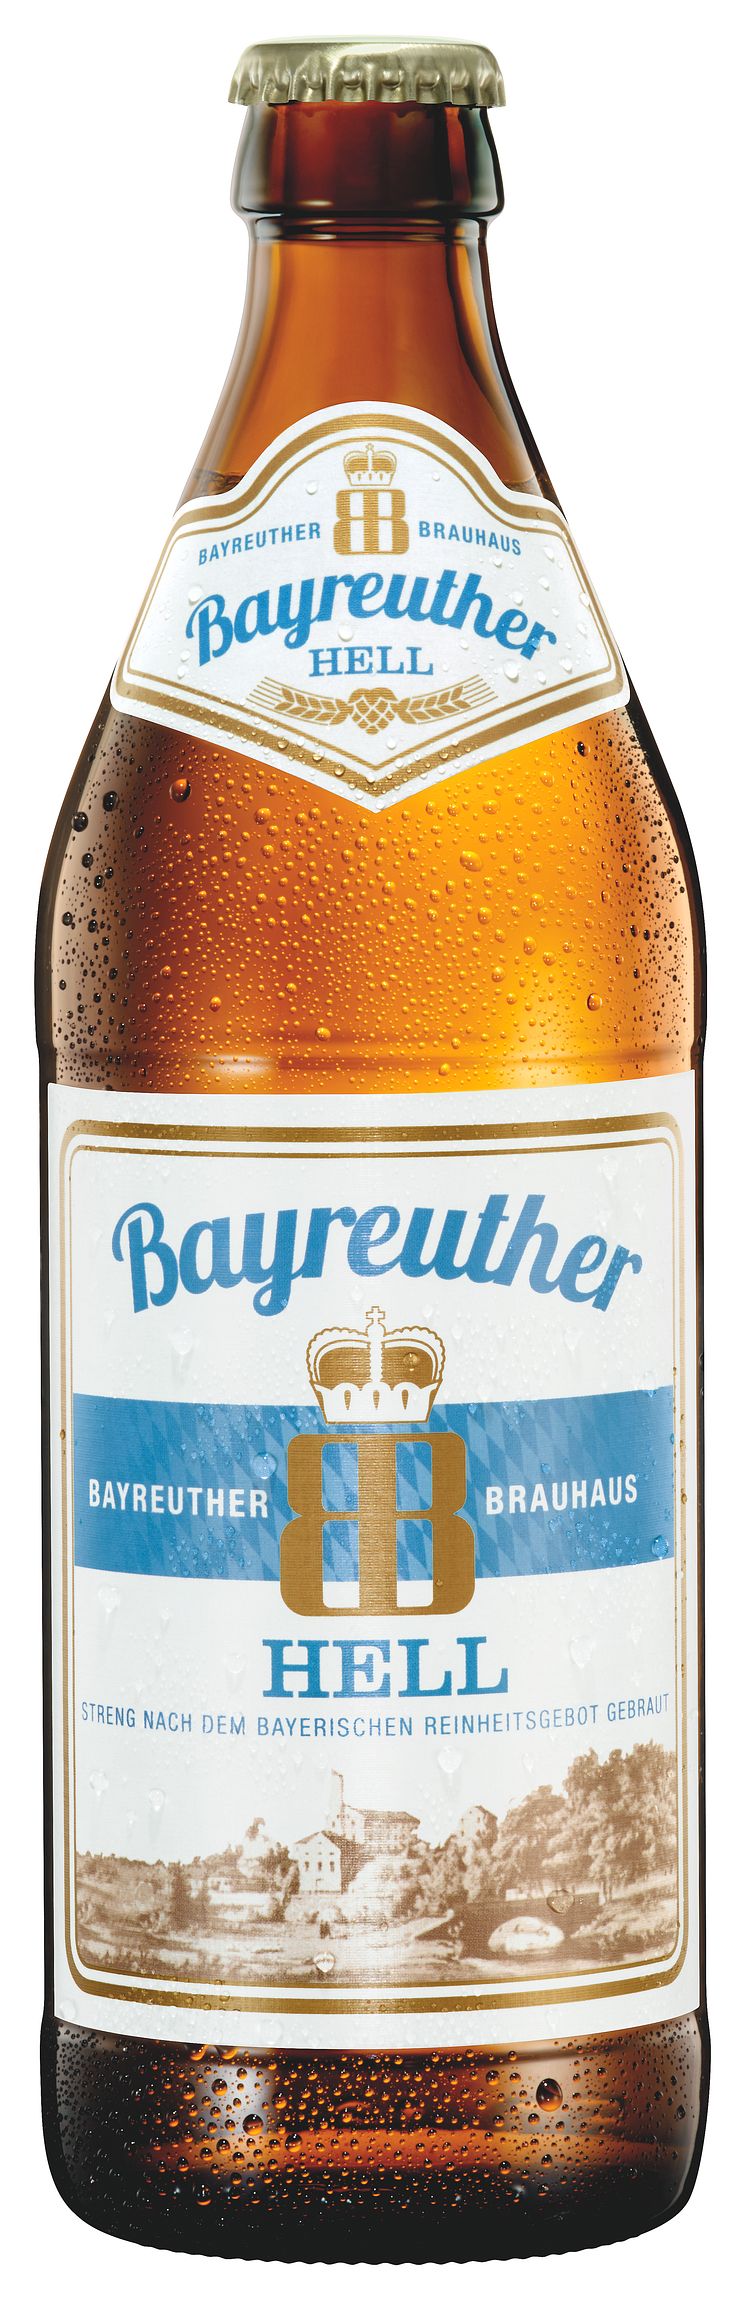 Bayreuther_HELL_Flasche